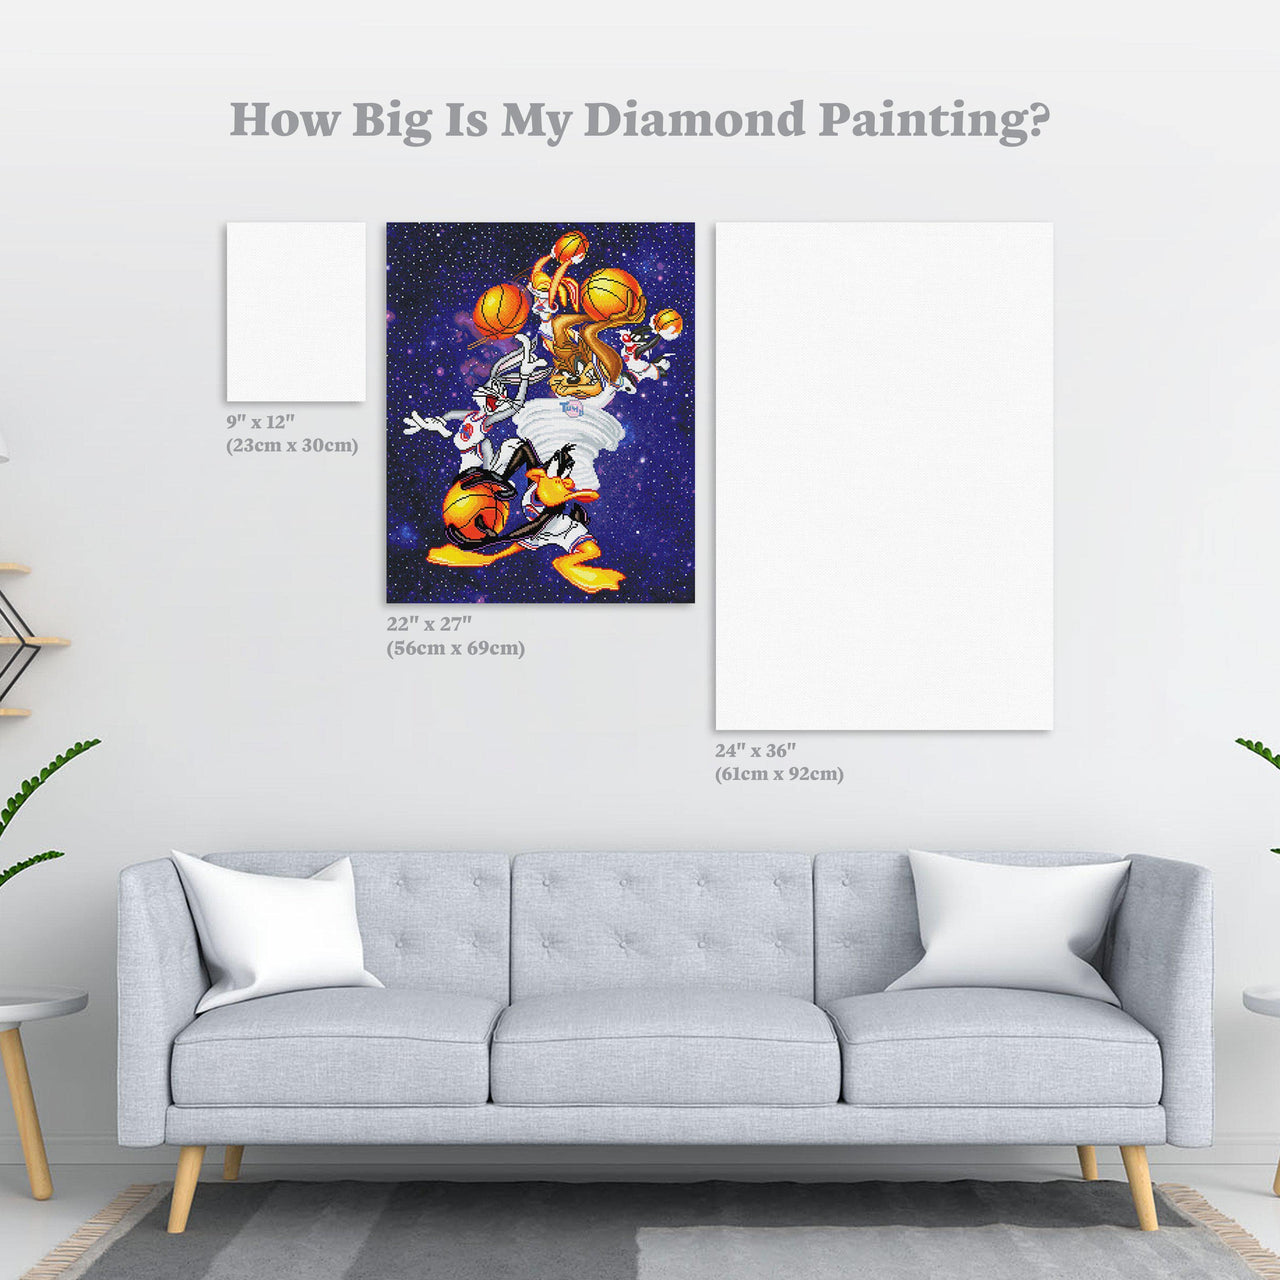 Diamond Painting Tune Squad Galaxy Go! 22" x 27″ (56cm x 69cm) / Square With 51 Colors Including 4 ABs / 60,333